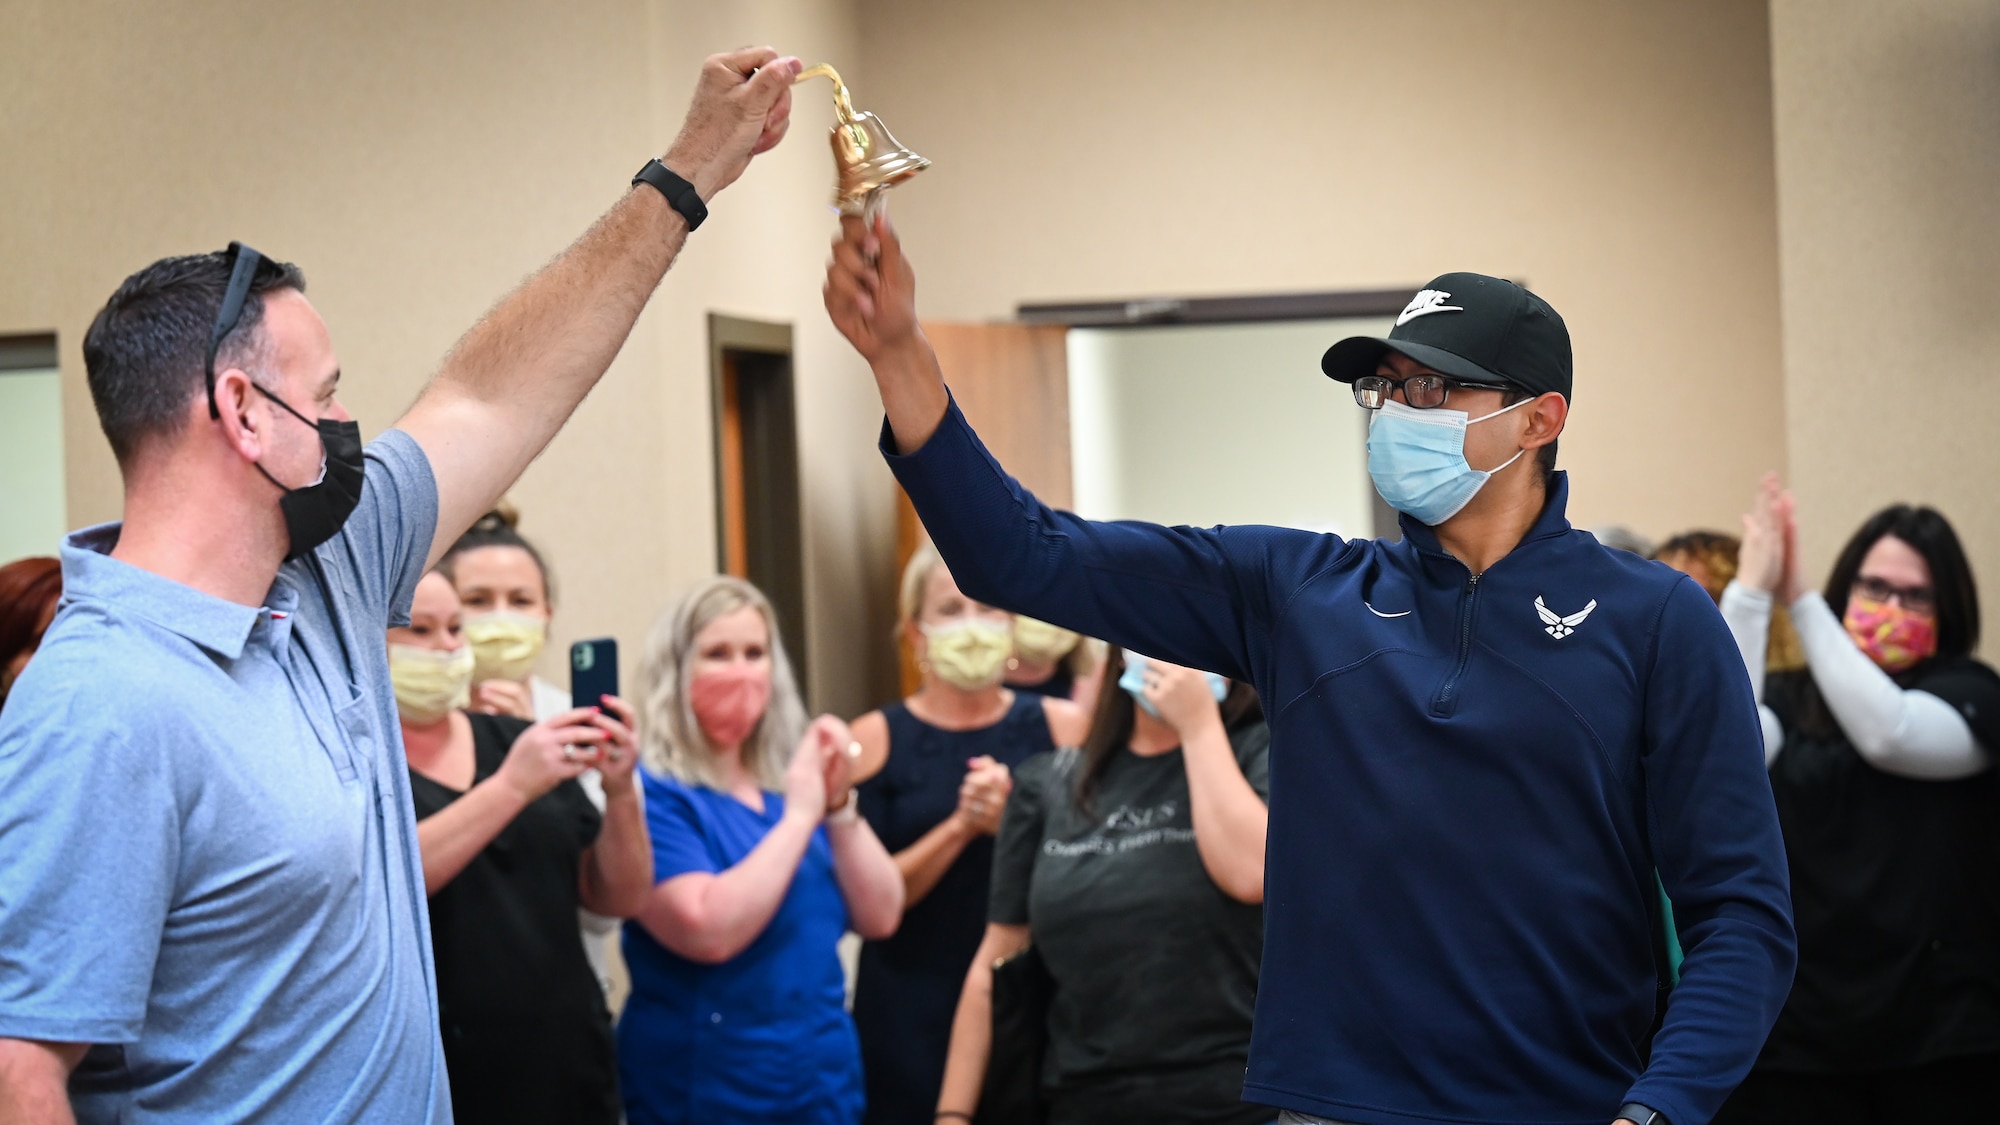 Senior Airman Eleazar Hernandez, 2nd Maintenance Squadron aerospace ground equipment journeyman, rings a bell after his final chemotherapy treatment at the CHRISTUS Health Shreveport-Bossier medical center, Louisiana, July 2, 2021. The bell signals the end of chemotherapy treatment and a warm tradition among cancer patients completing radiation treatments. (U.S. Air Force photo by Airman 1st Class Jonathan E. Ramos)